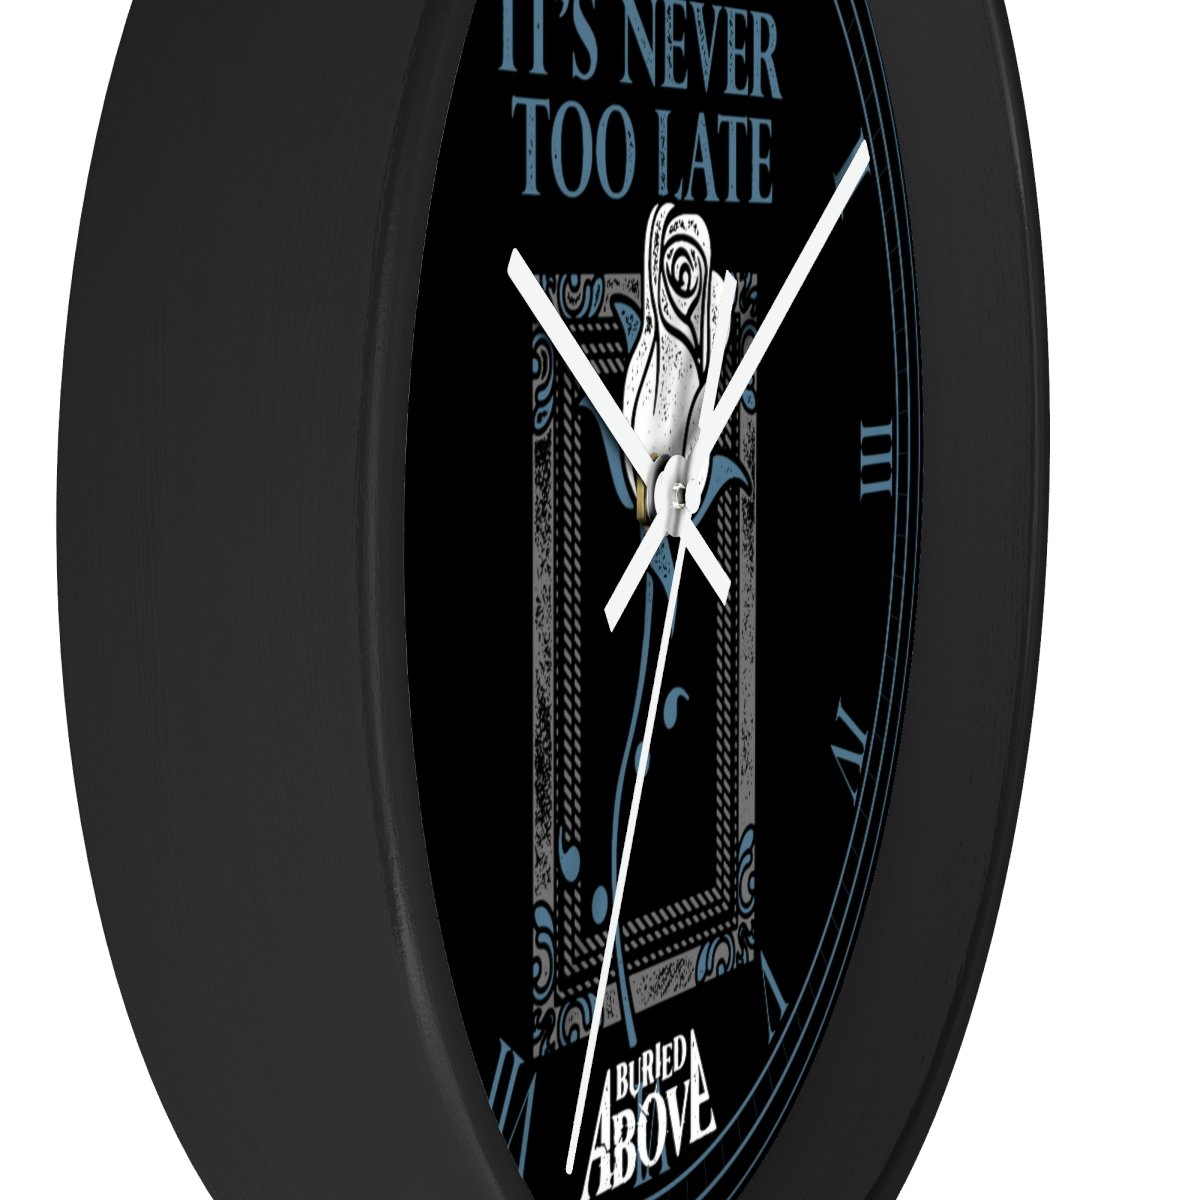 Buried Above – It’s Never Too Late Wall Clock